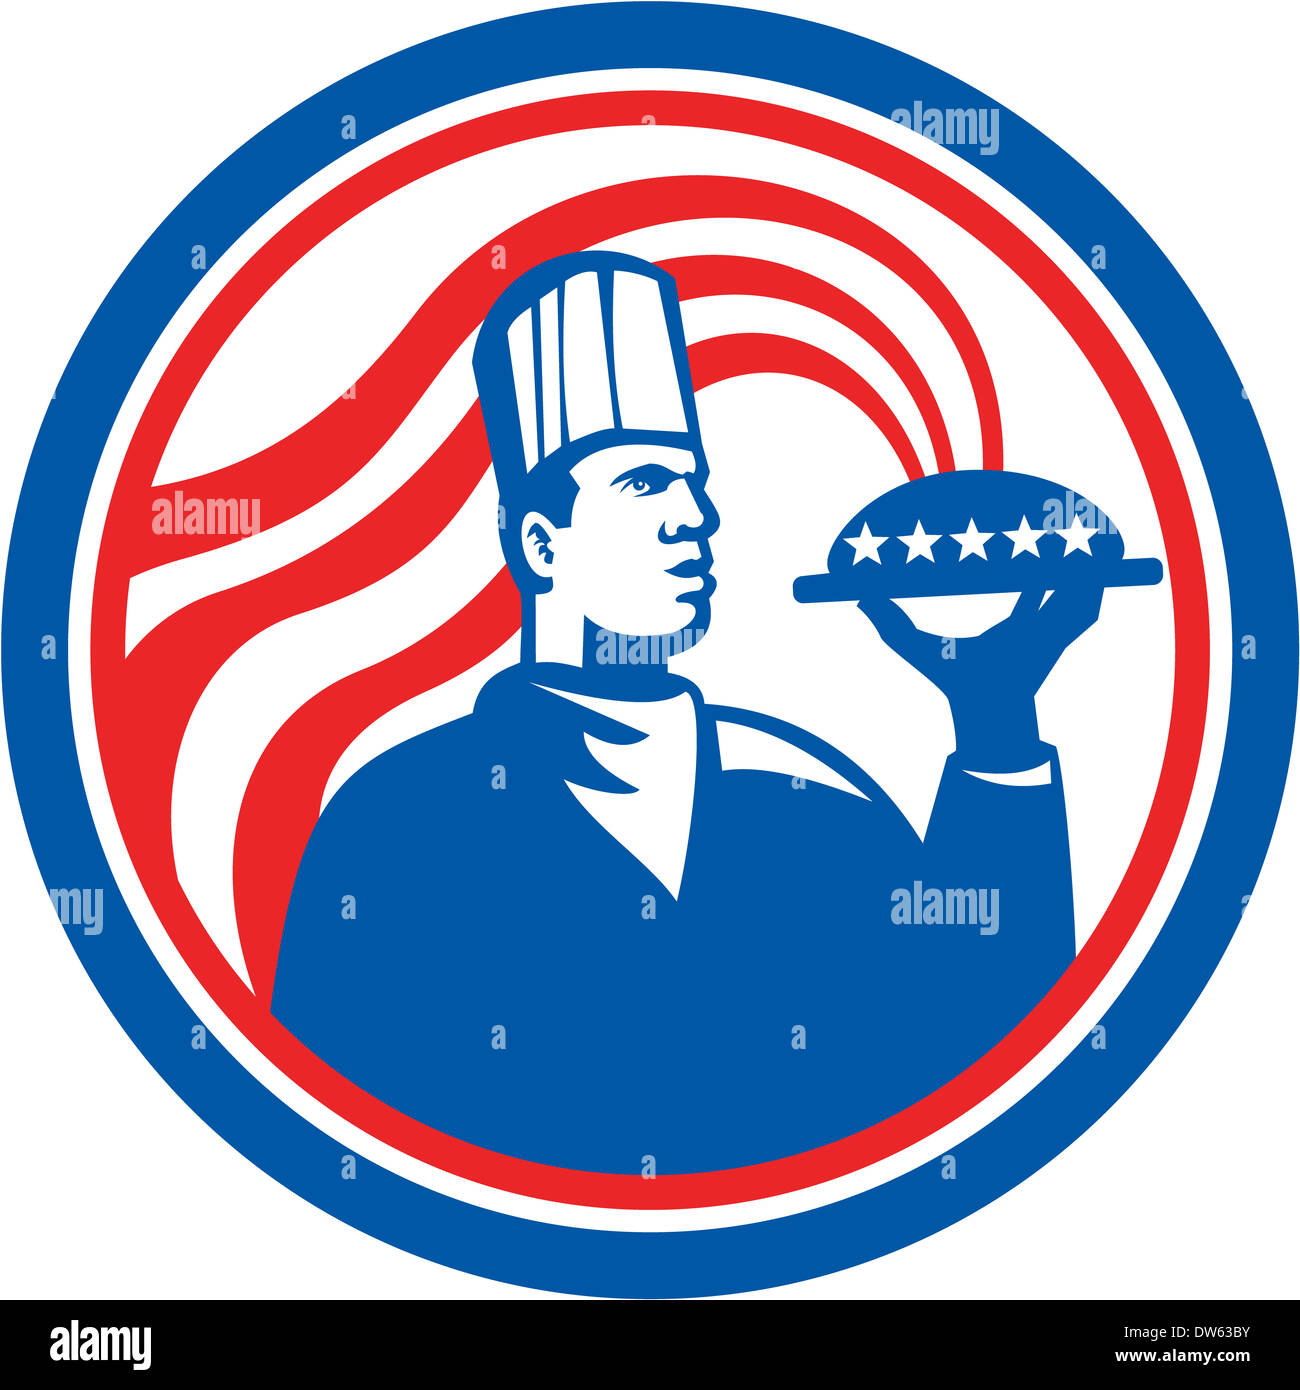 Illustration of an American chef, cook or baker holding serving plate platter of food set inside circle with stars and stripes done in retro style. Stock Photo